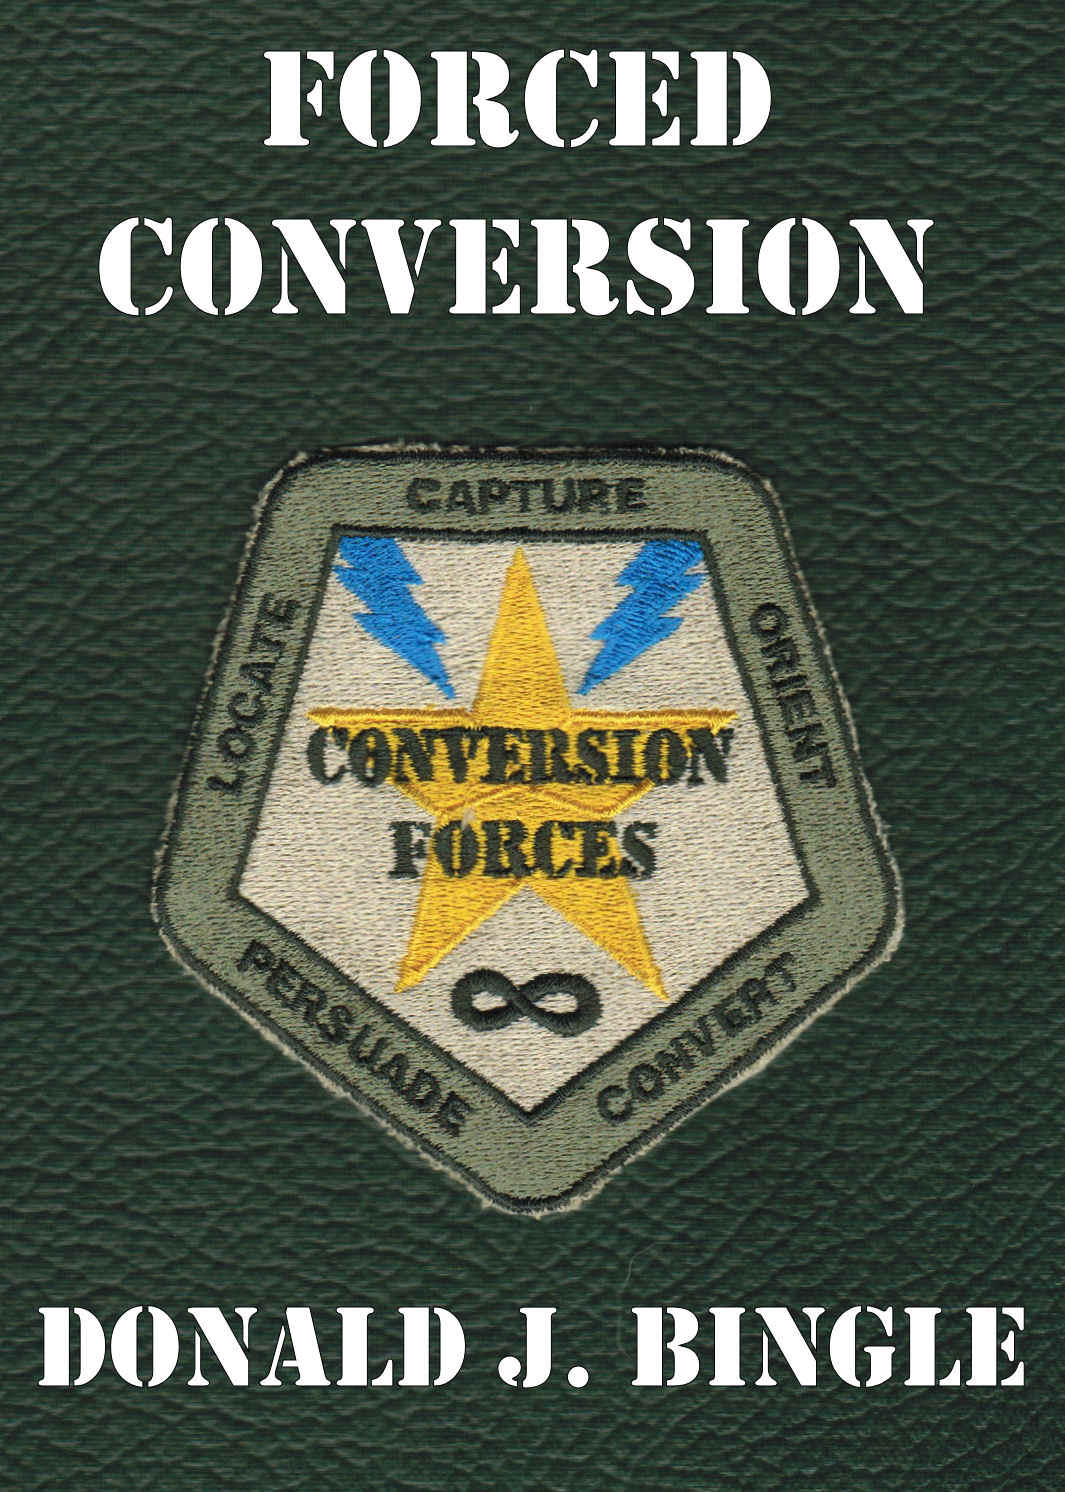 Forced_Conversion_Rescanned_Cover.jpg (198375 bytes)